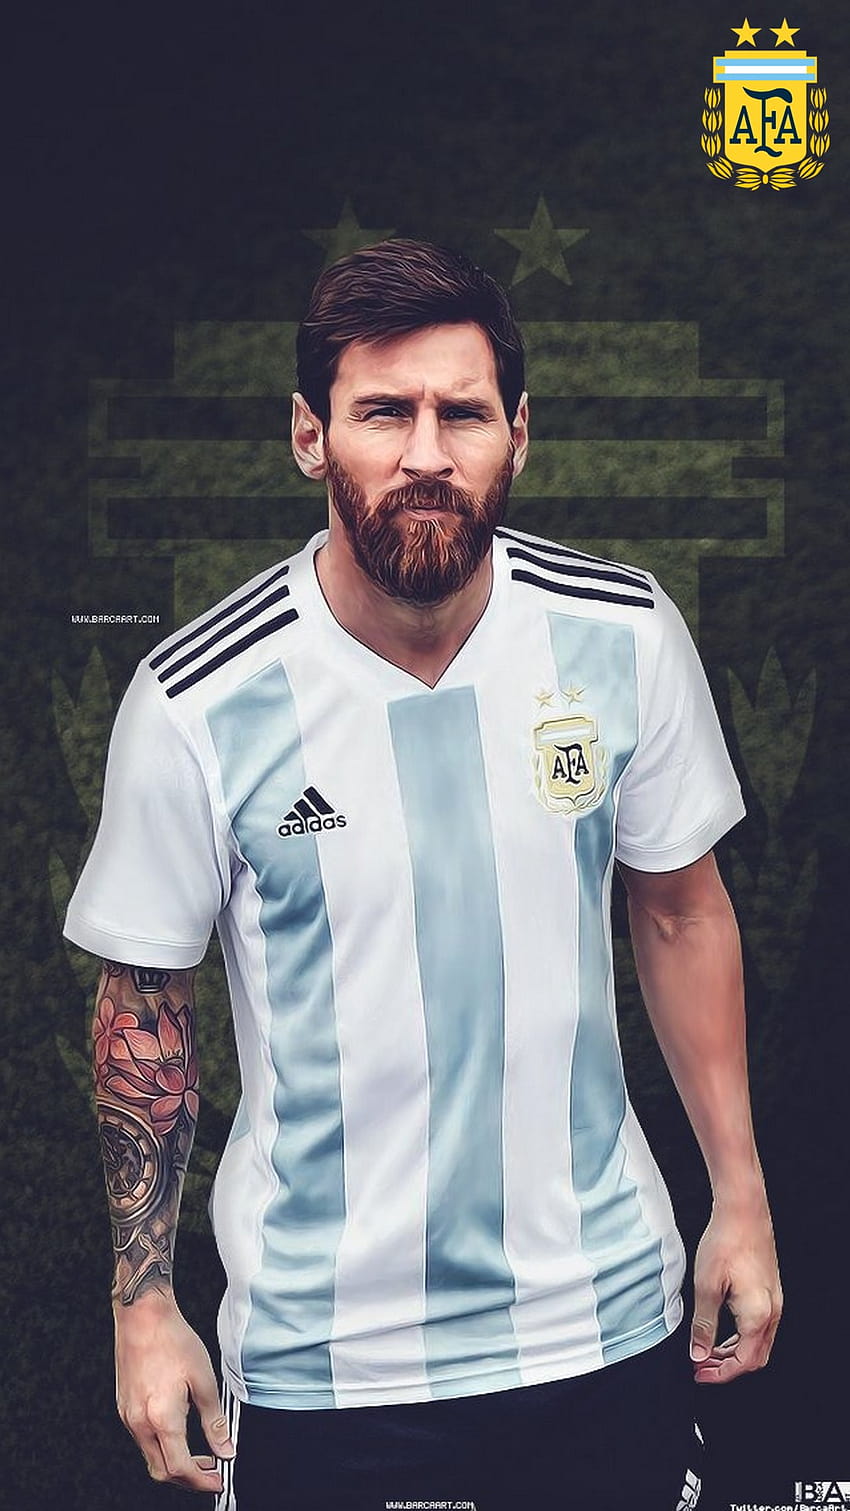 Lionel Messi wallpaper by abdullahh035 - Download on ZEDGE™ | c7fc